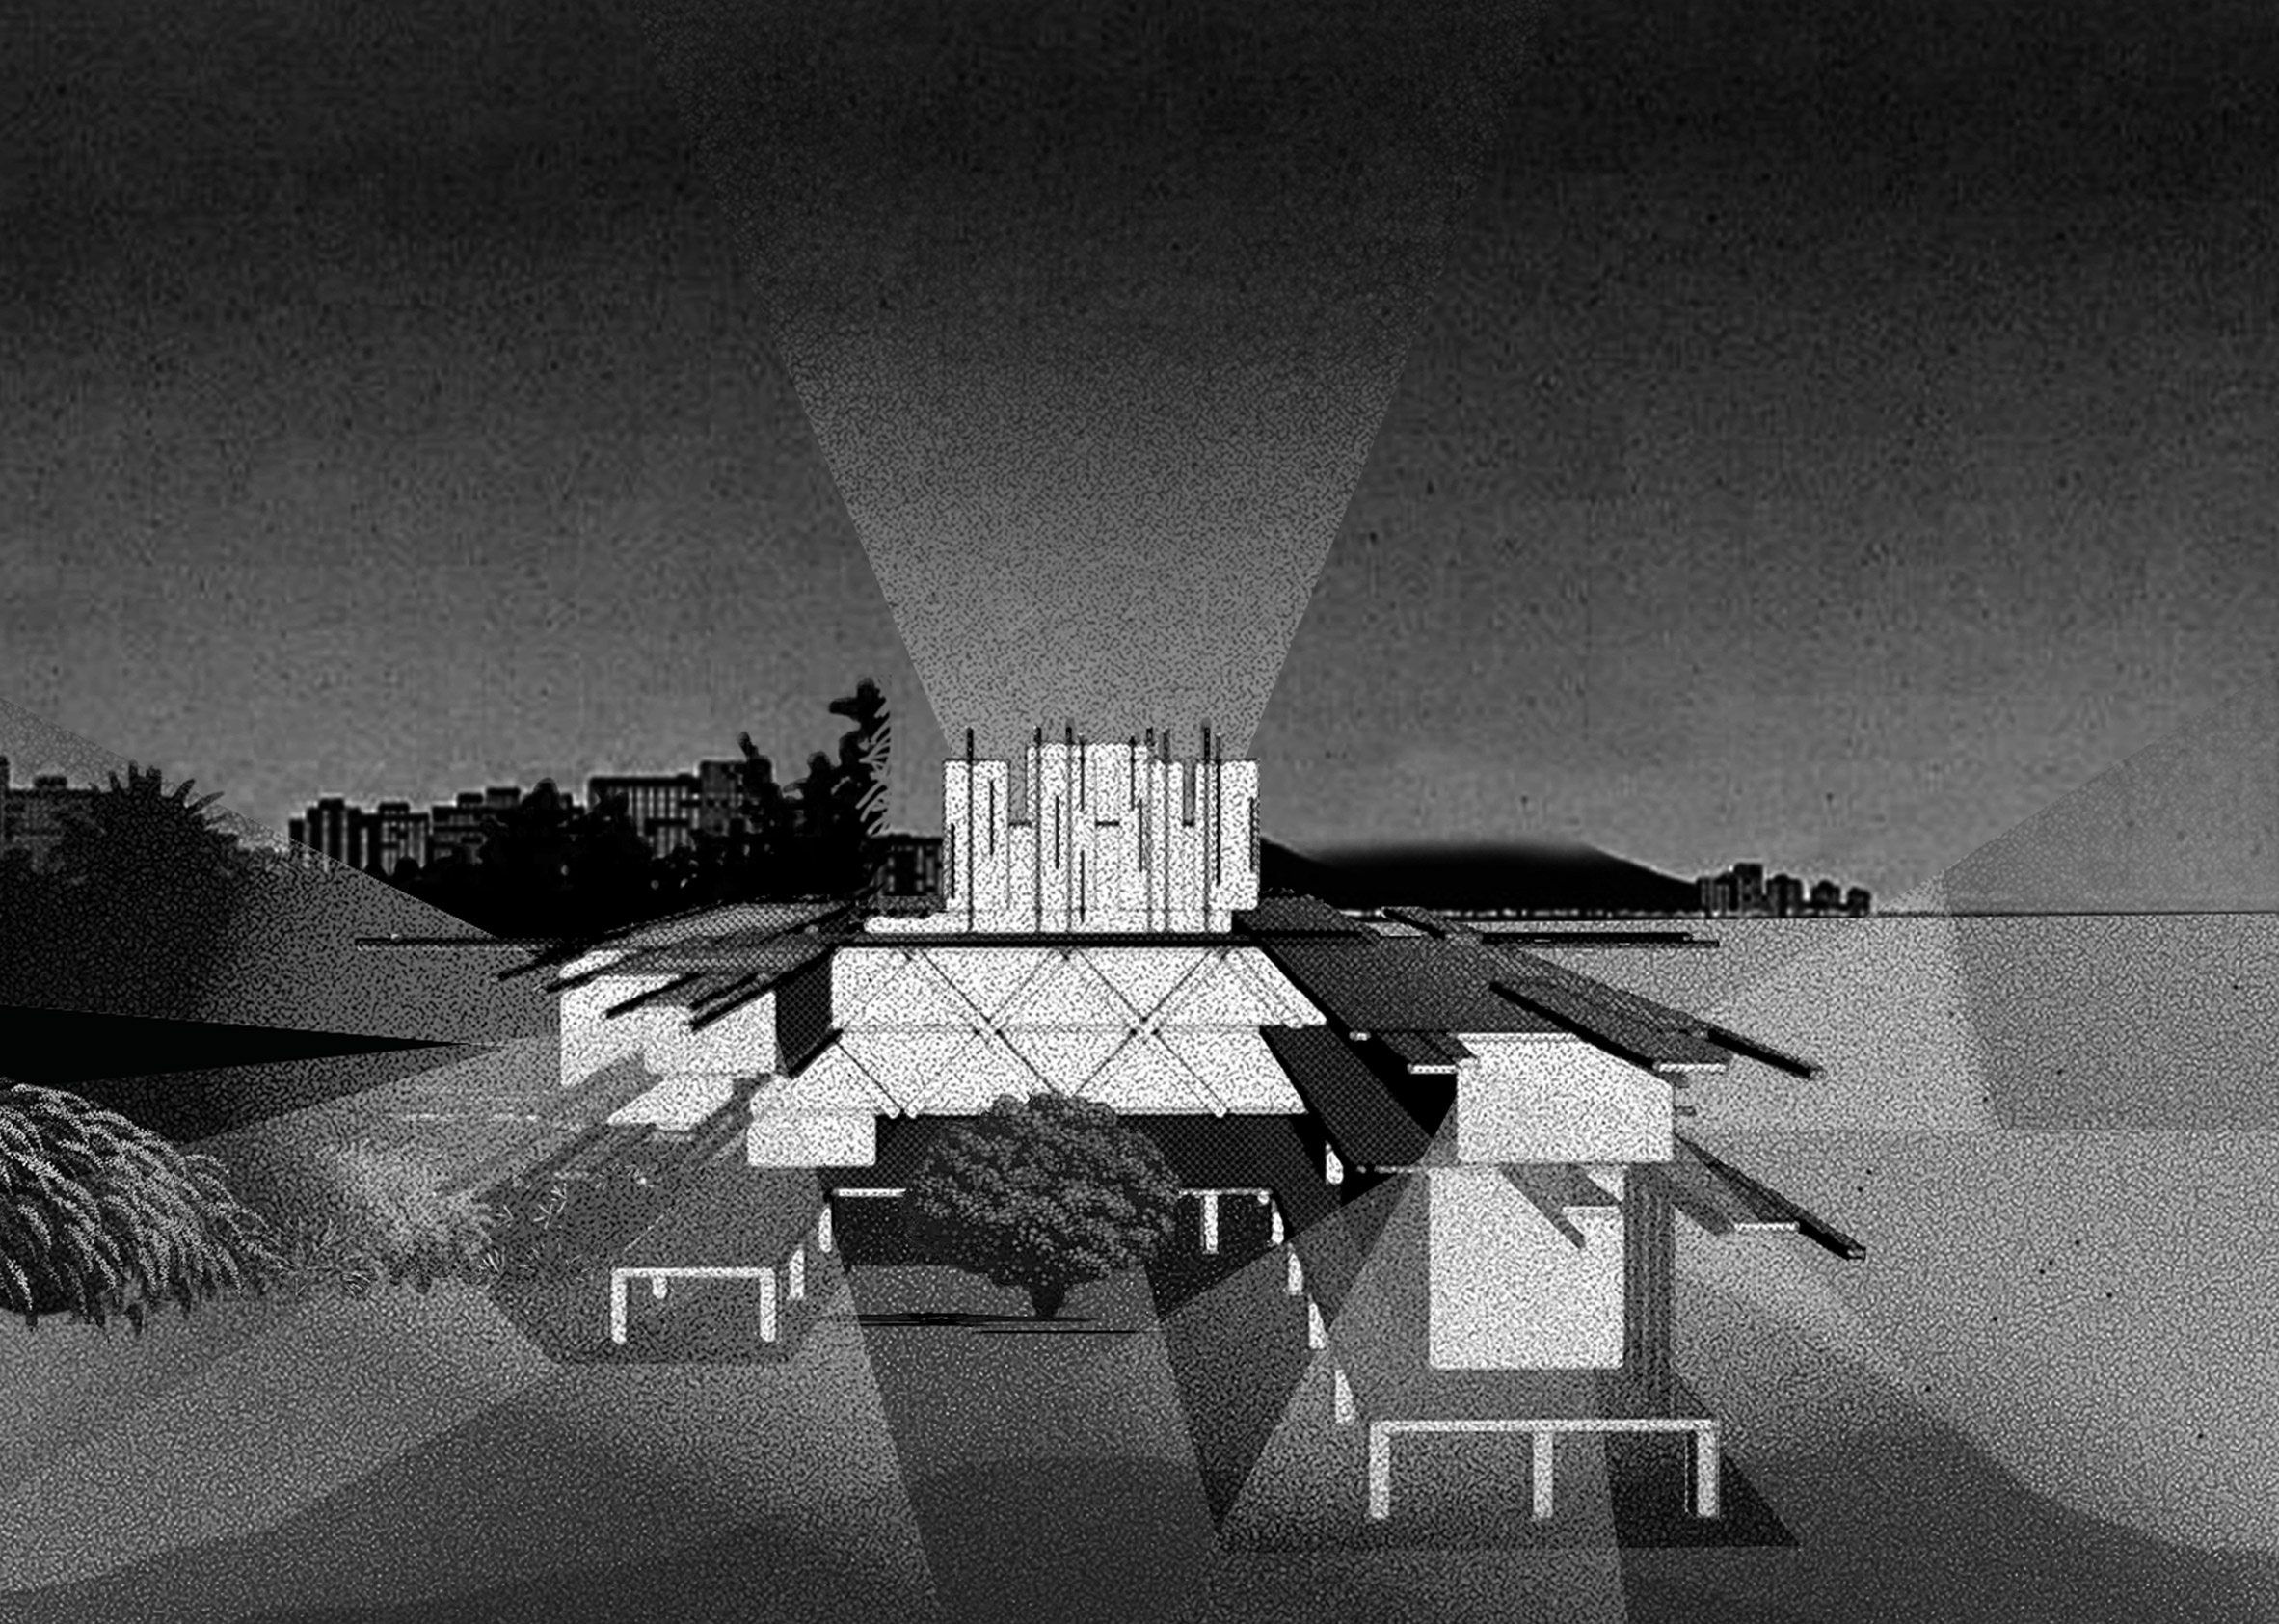 Black and white visualisation of a theatre